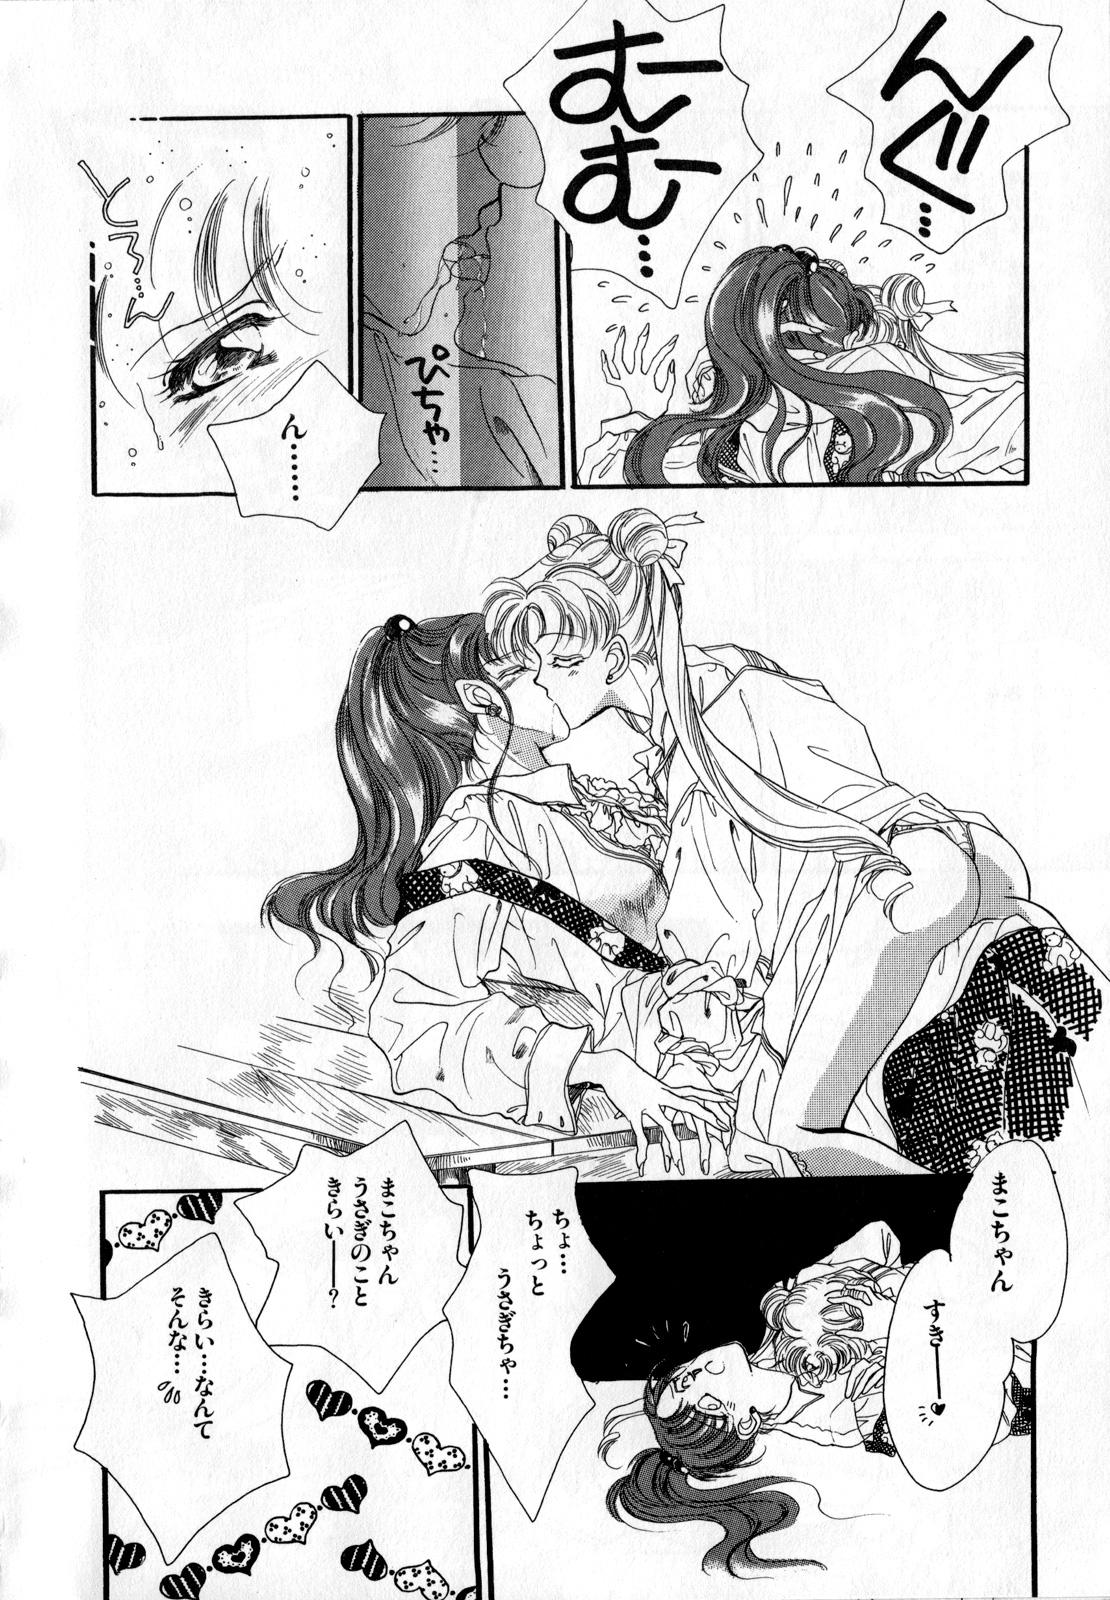 Collar Lunatic Party 2 - Sailor moon Raw - Page 7